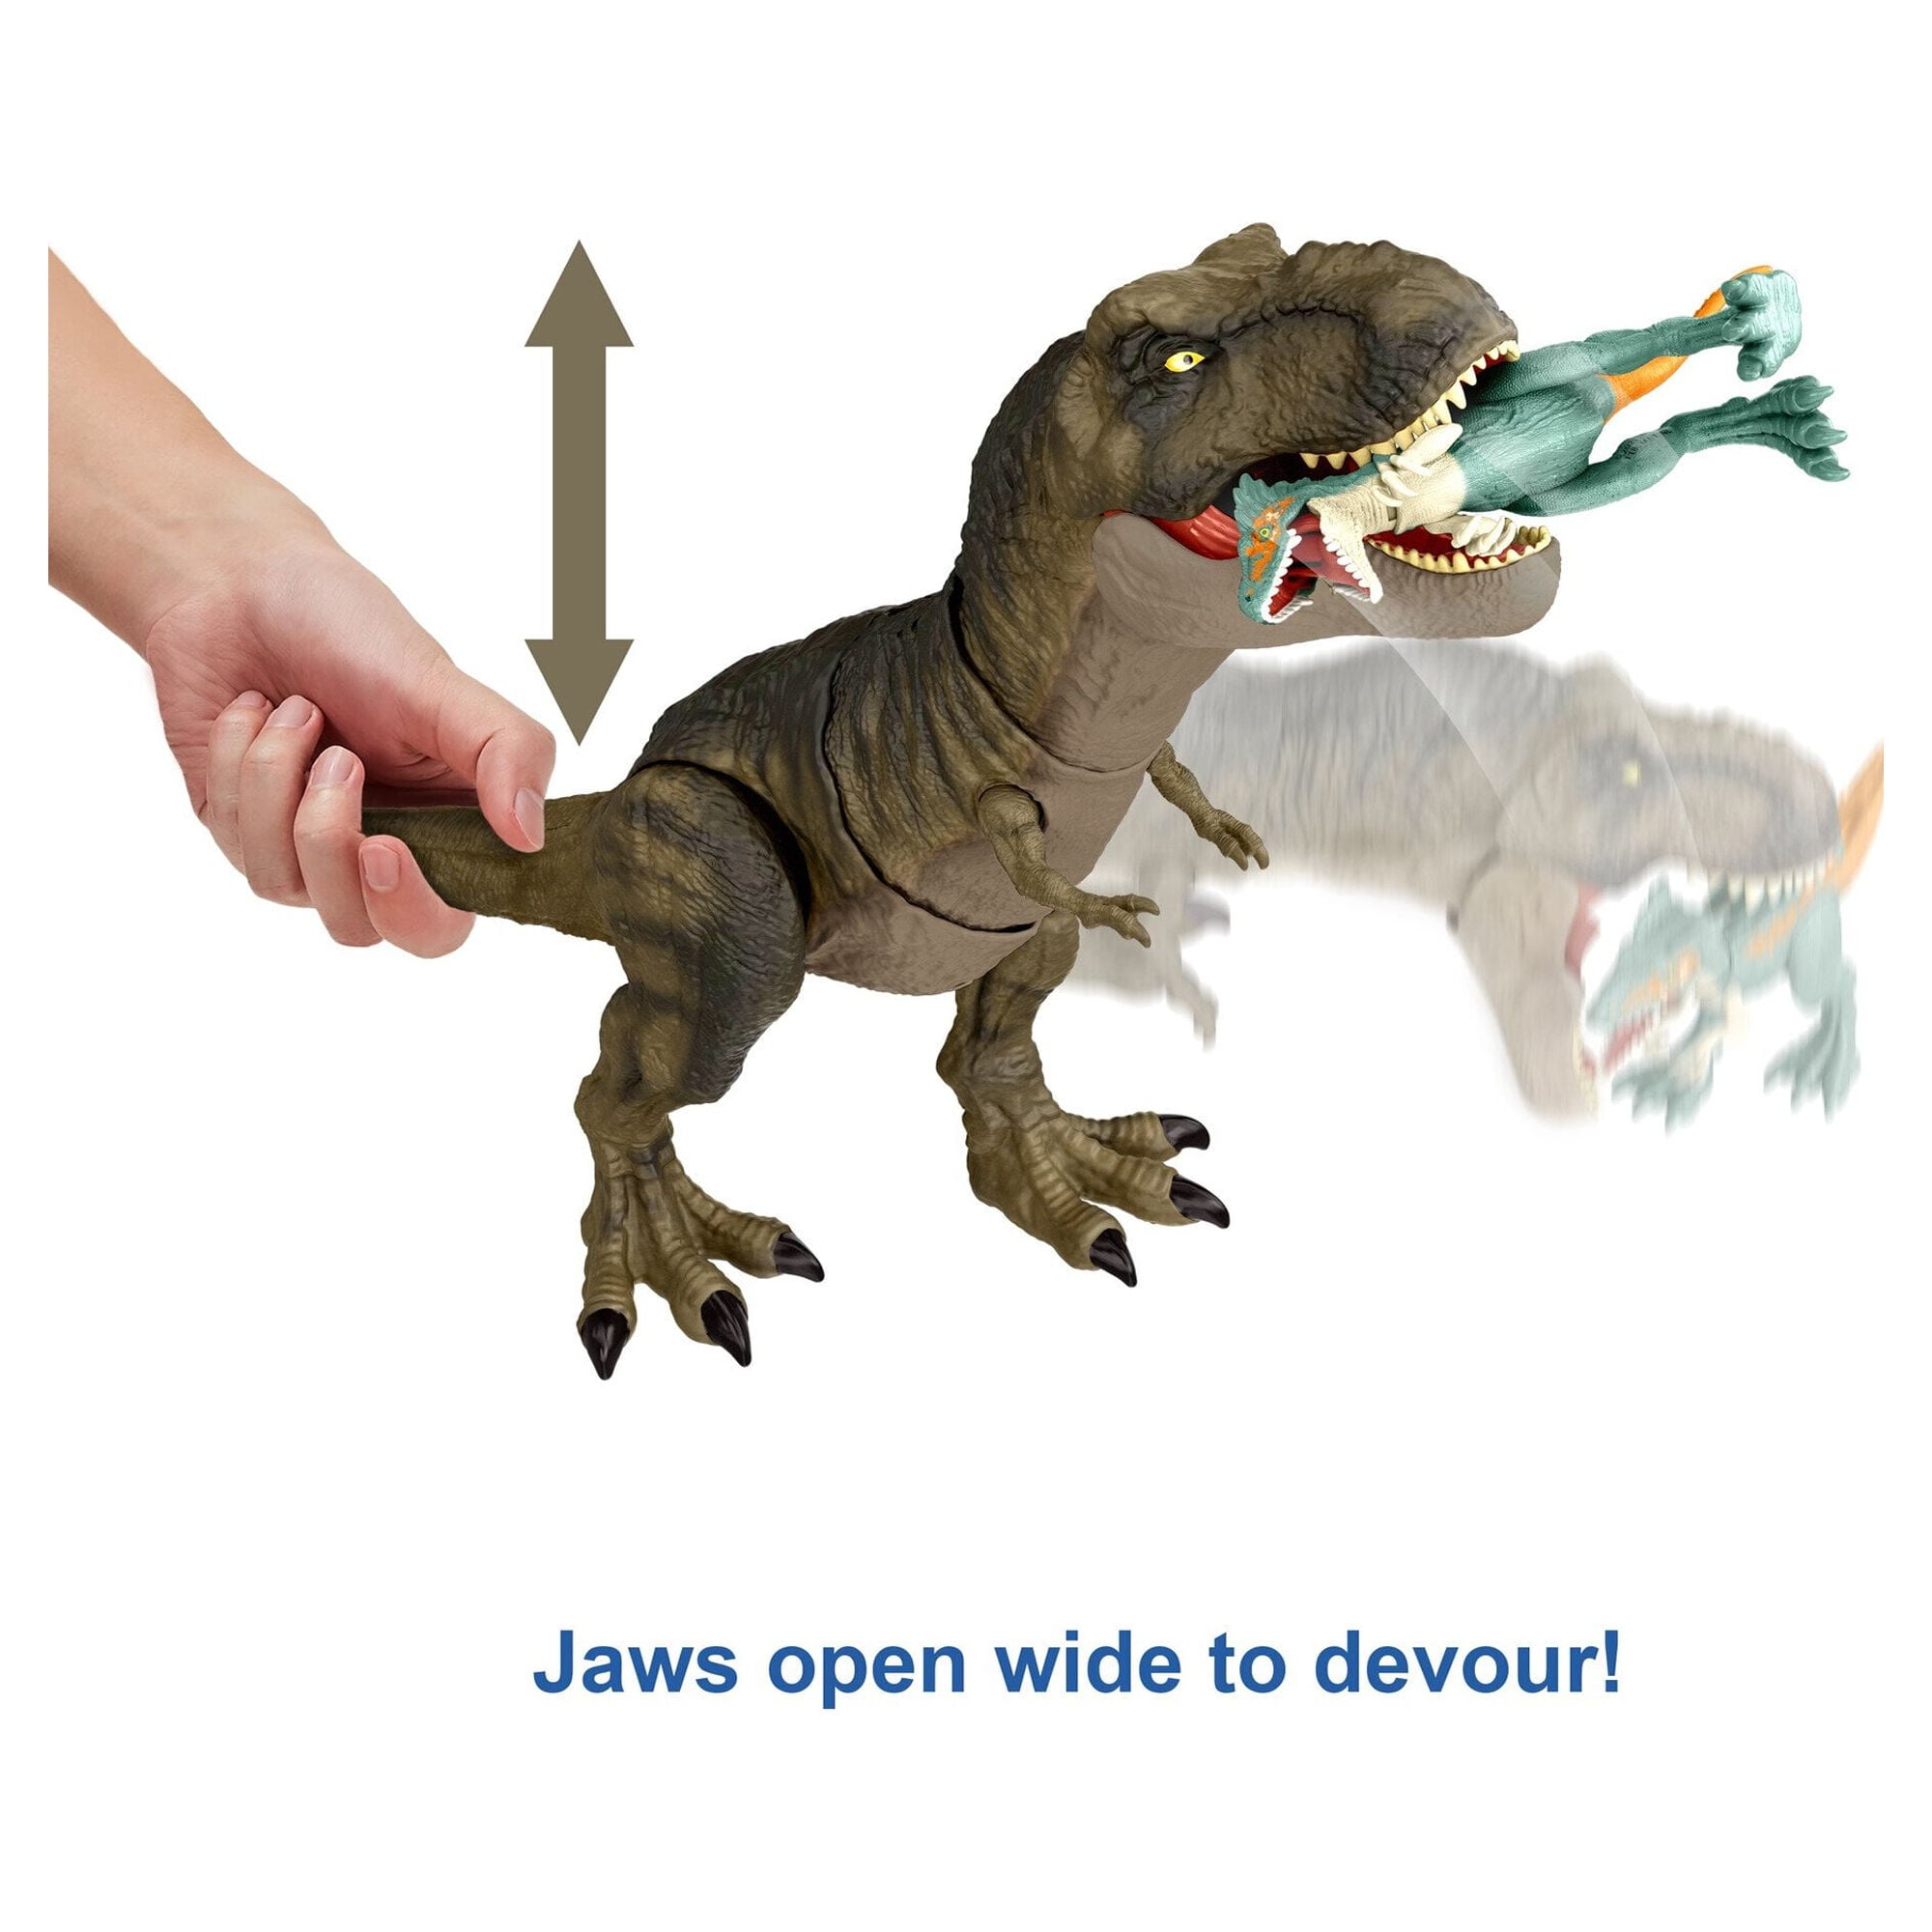 All I Want in Life Is an Open-World Dinosaur Videogame